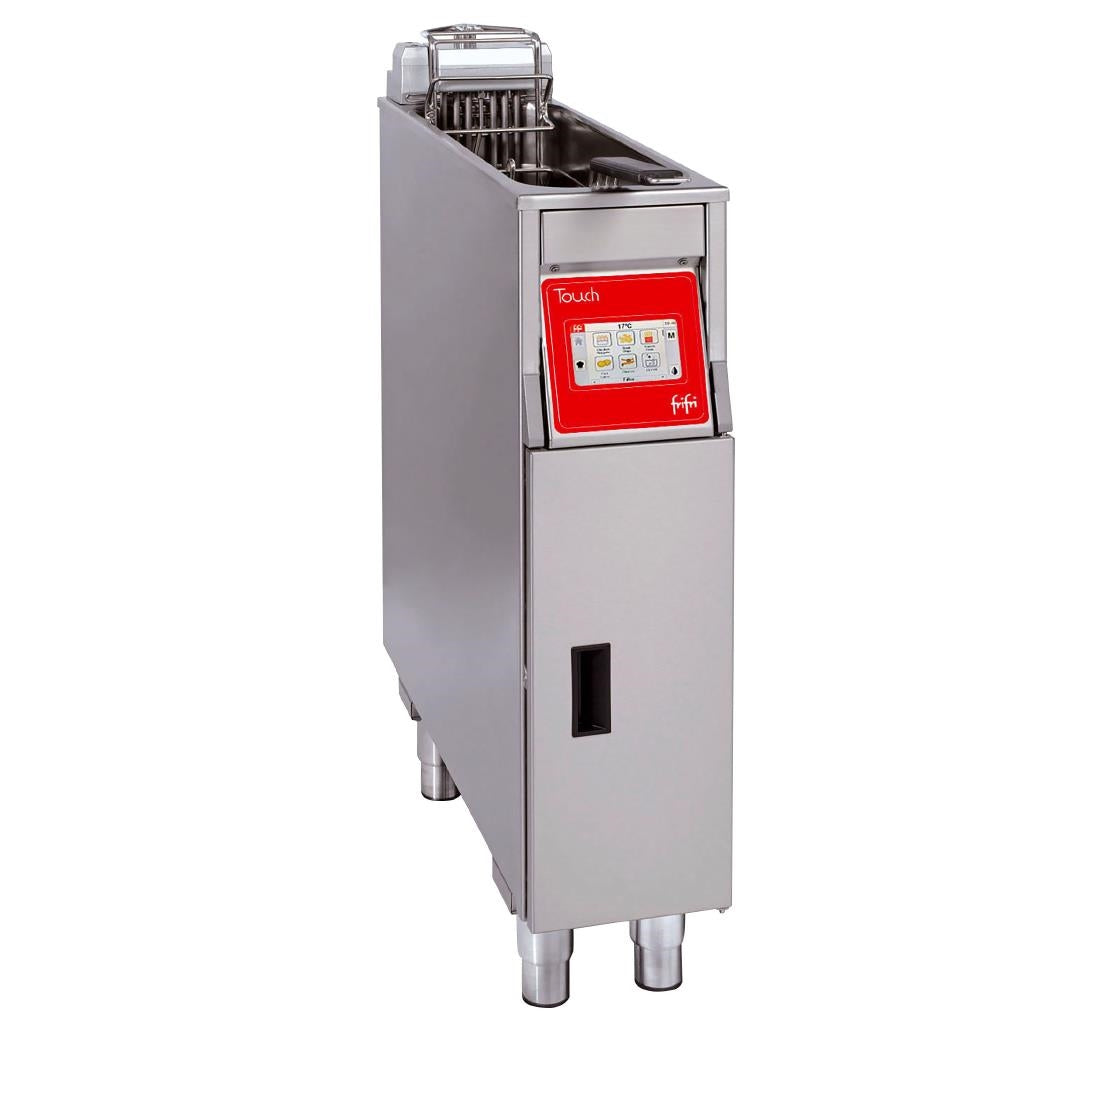 HS003-3PH FriFri Touch 211 Electric Free-Standing Single Tank Fryer 1 Basket 11kW - Three Phase